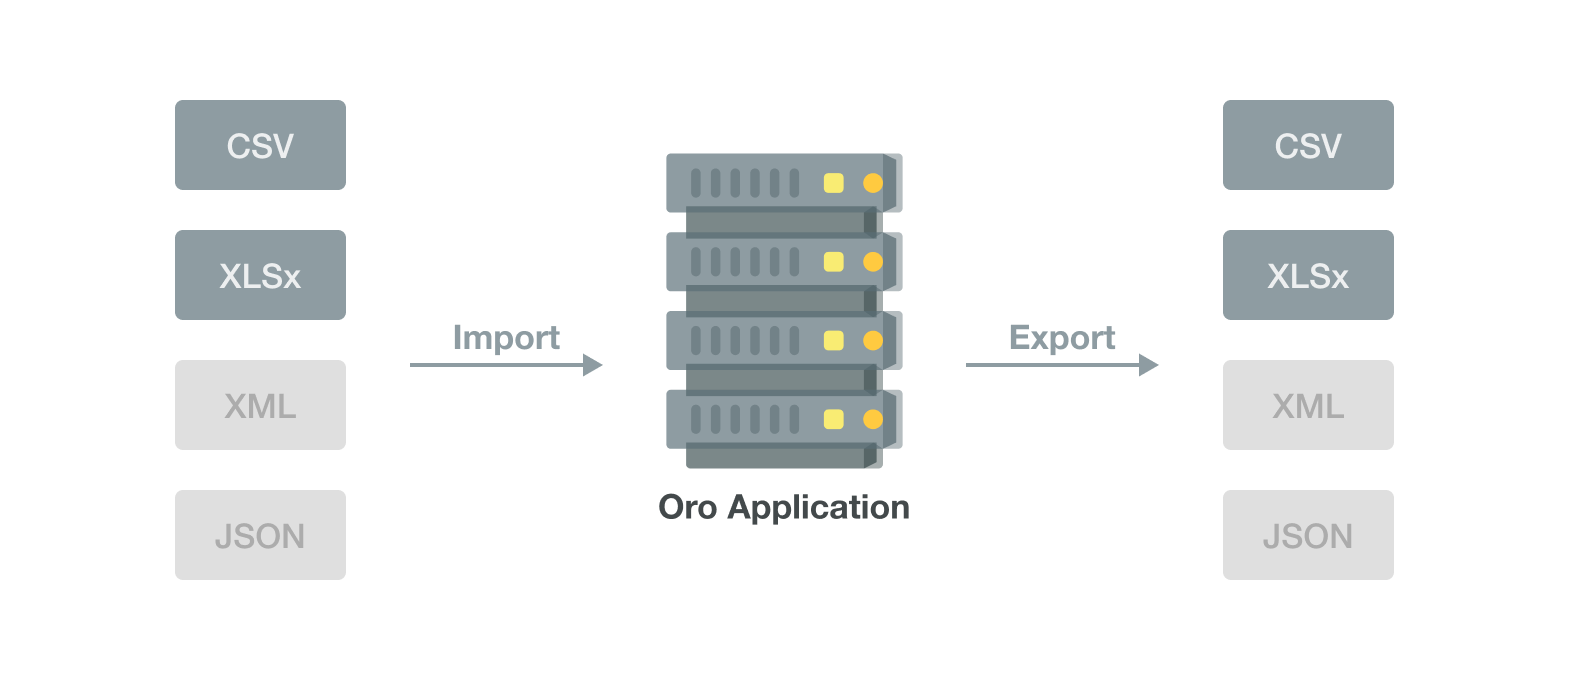 Illustration of how import works in Oro